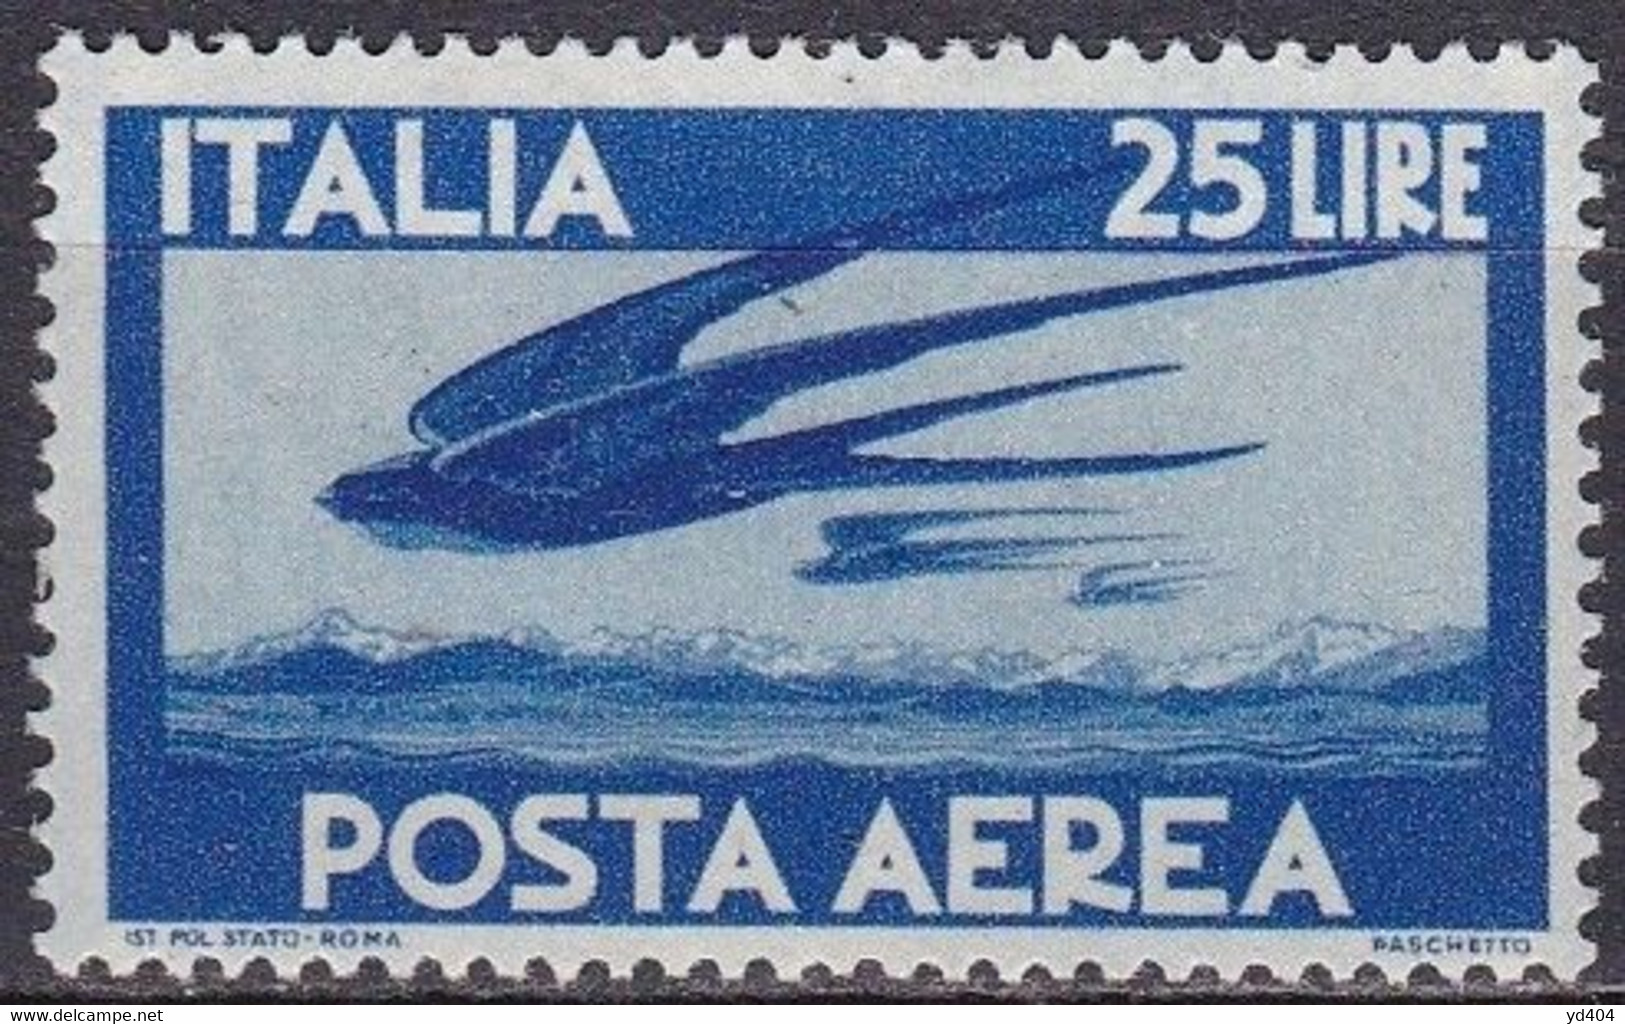 IT124 – ITALY - ITALIE – AIRMAIL – 1947 – CLAPS HANDS & PLANE – Y&T # 118 MVLH 15 € - Luchtpost